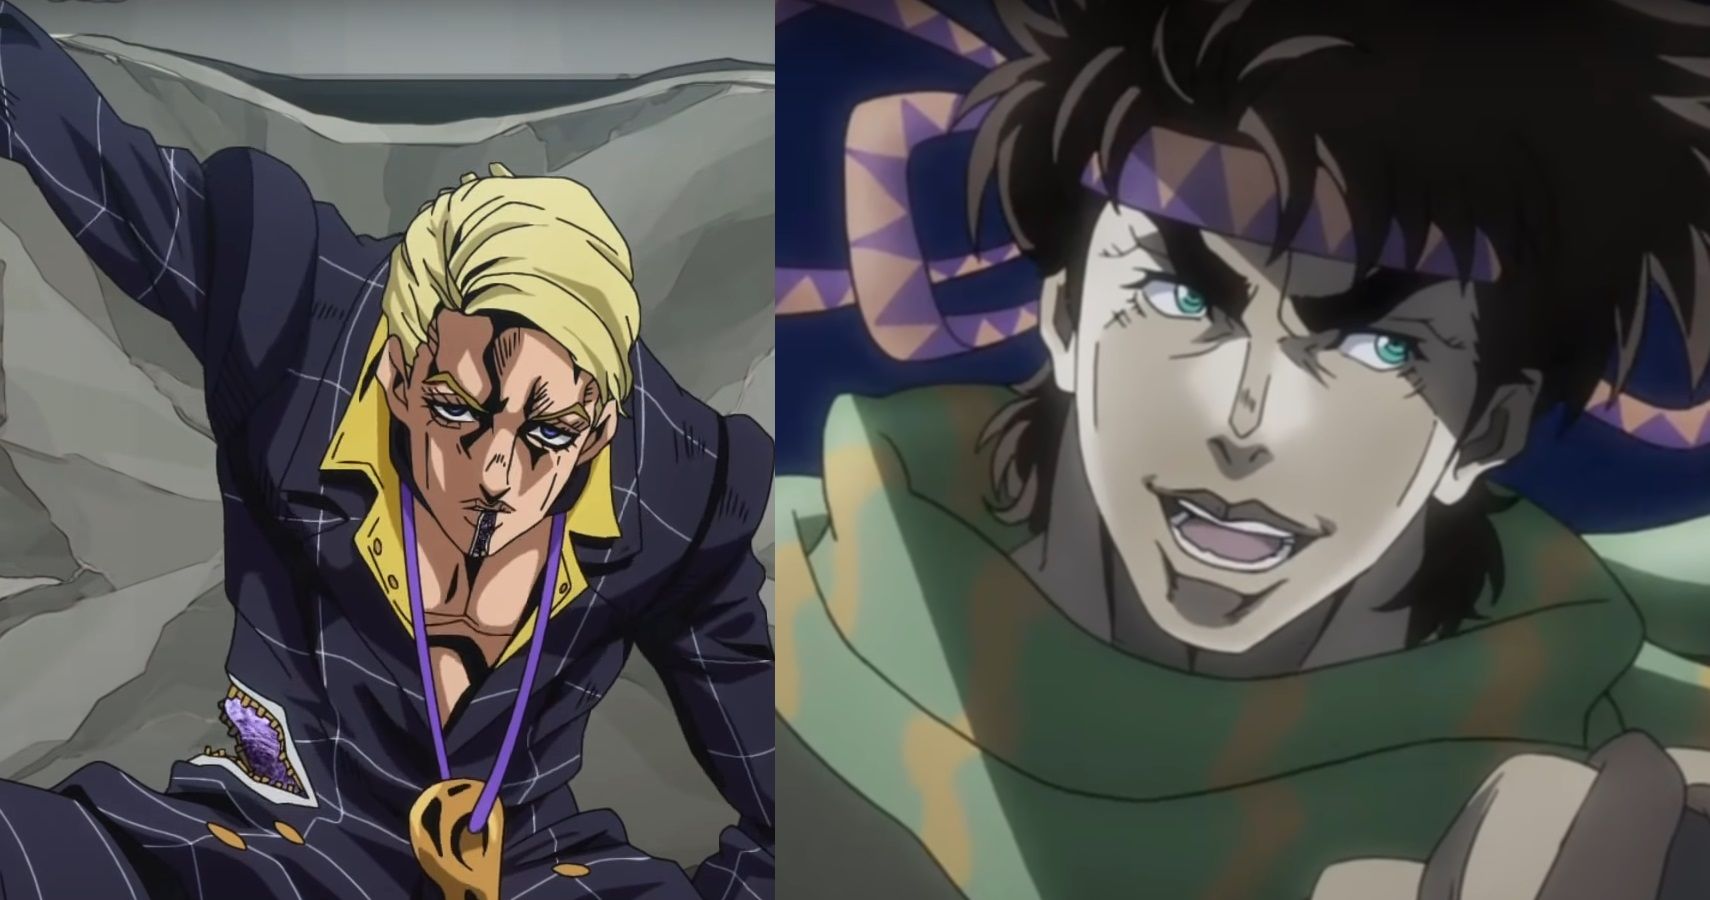 JoJo's Bizarre Adventure: The 10 Most Stylish Outfits in the Anime